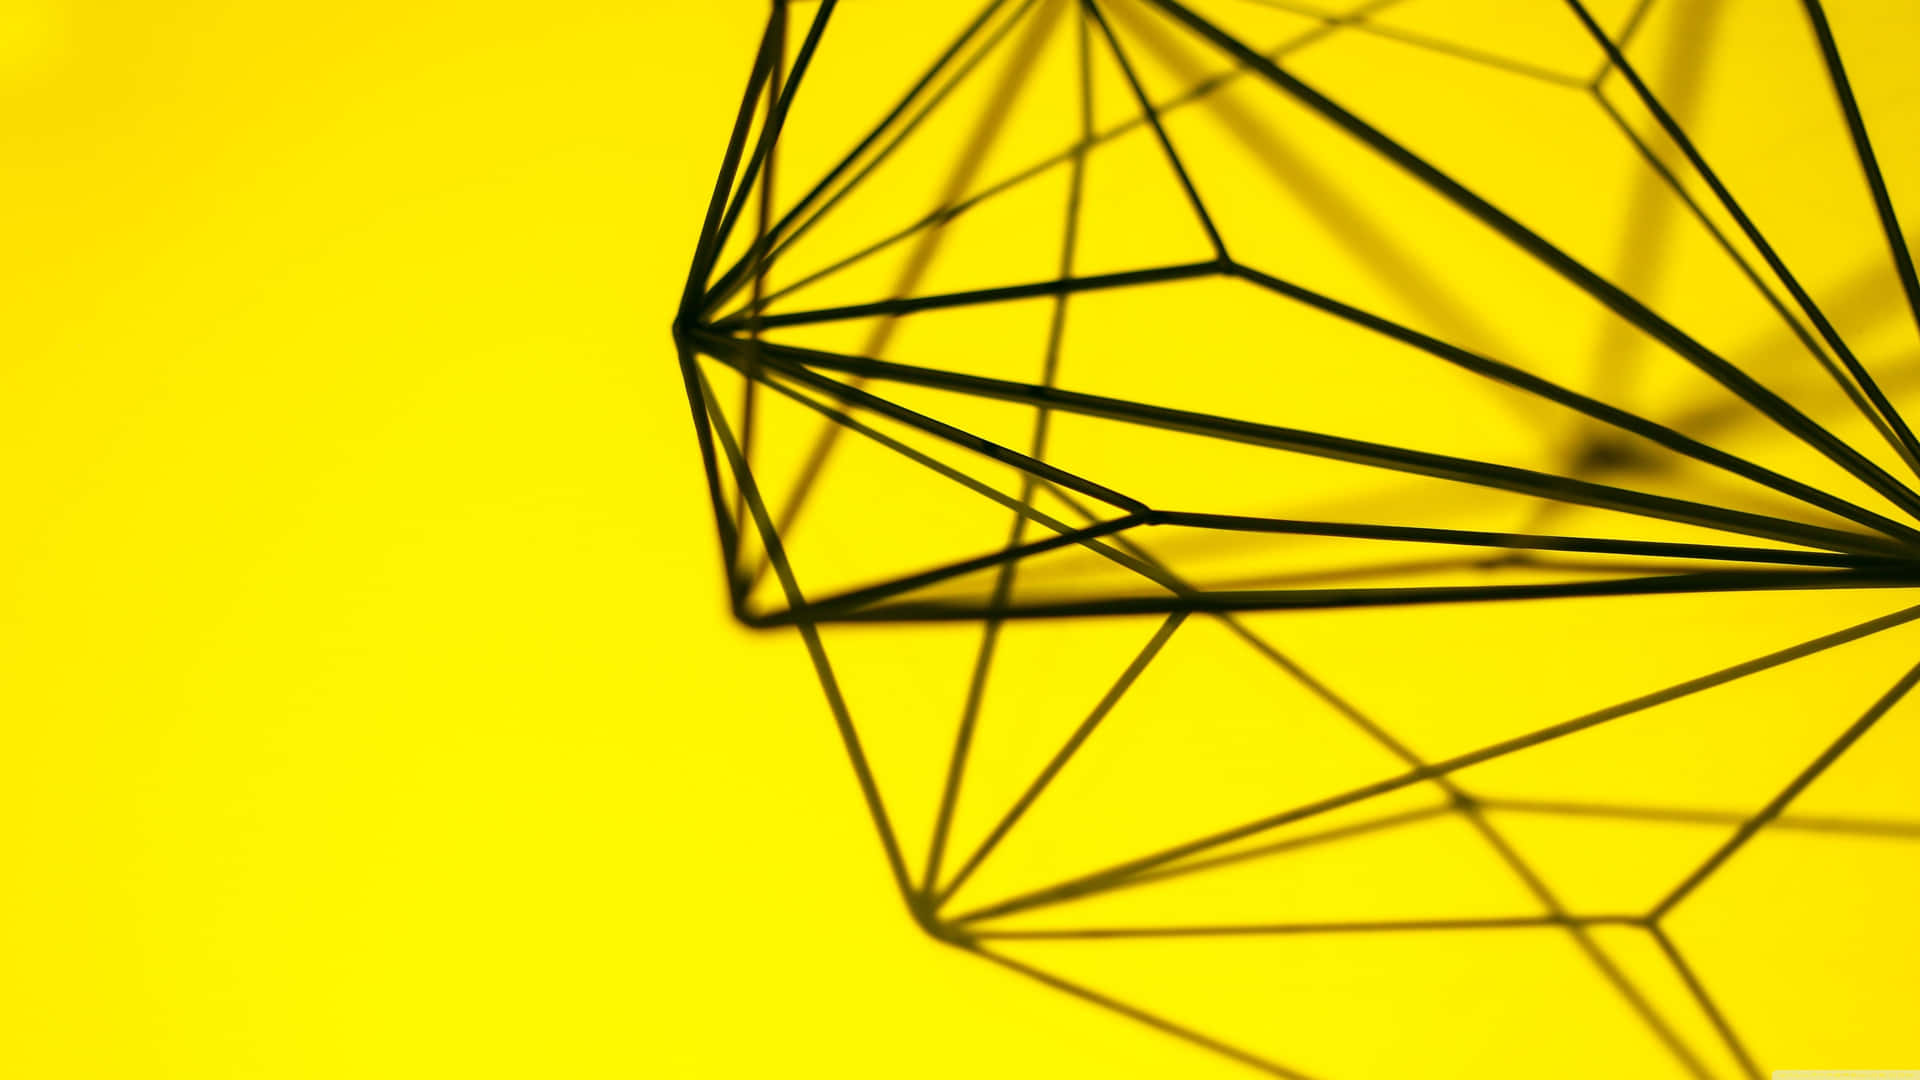 Bright yellow and black abstract background